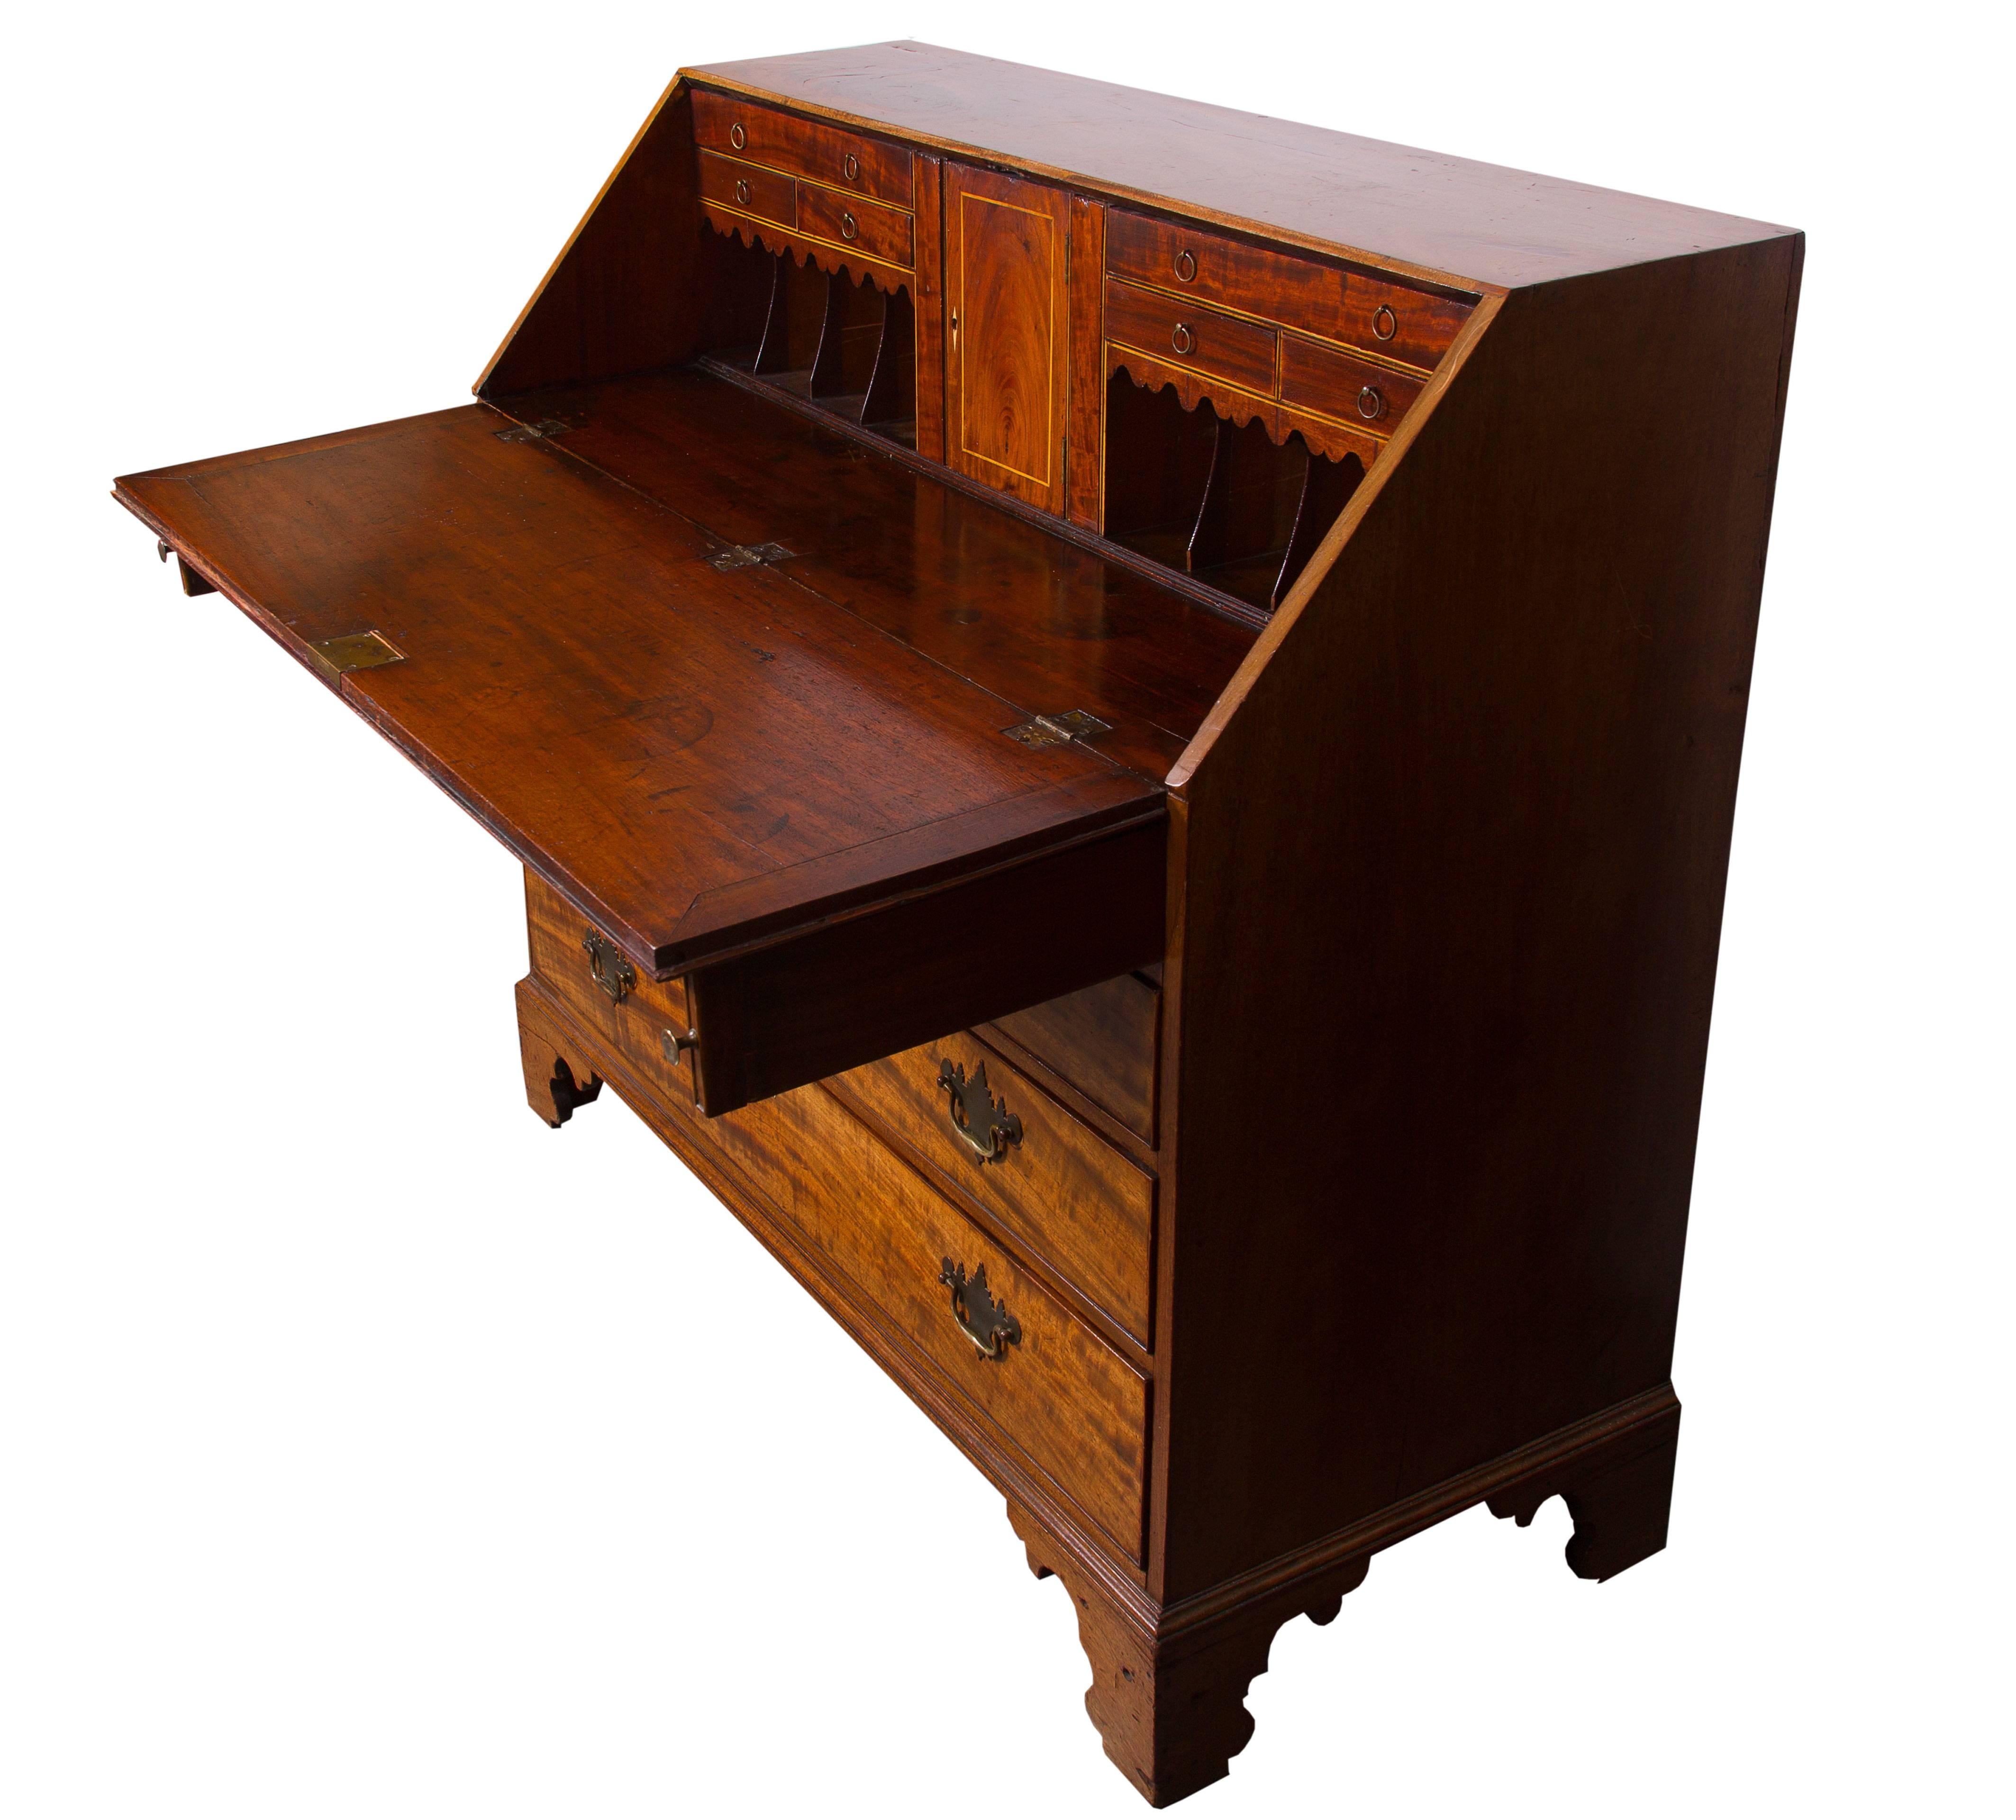 English mahogany slant front bureau. Drop front opening to reveal writing surface, miniature drawers and document compartments over four long graduated drawers with ivory escutcheons and raised on shaped feet.